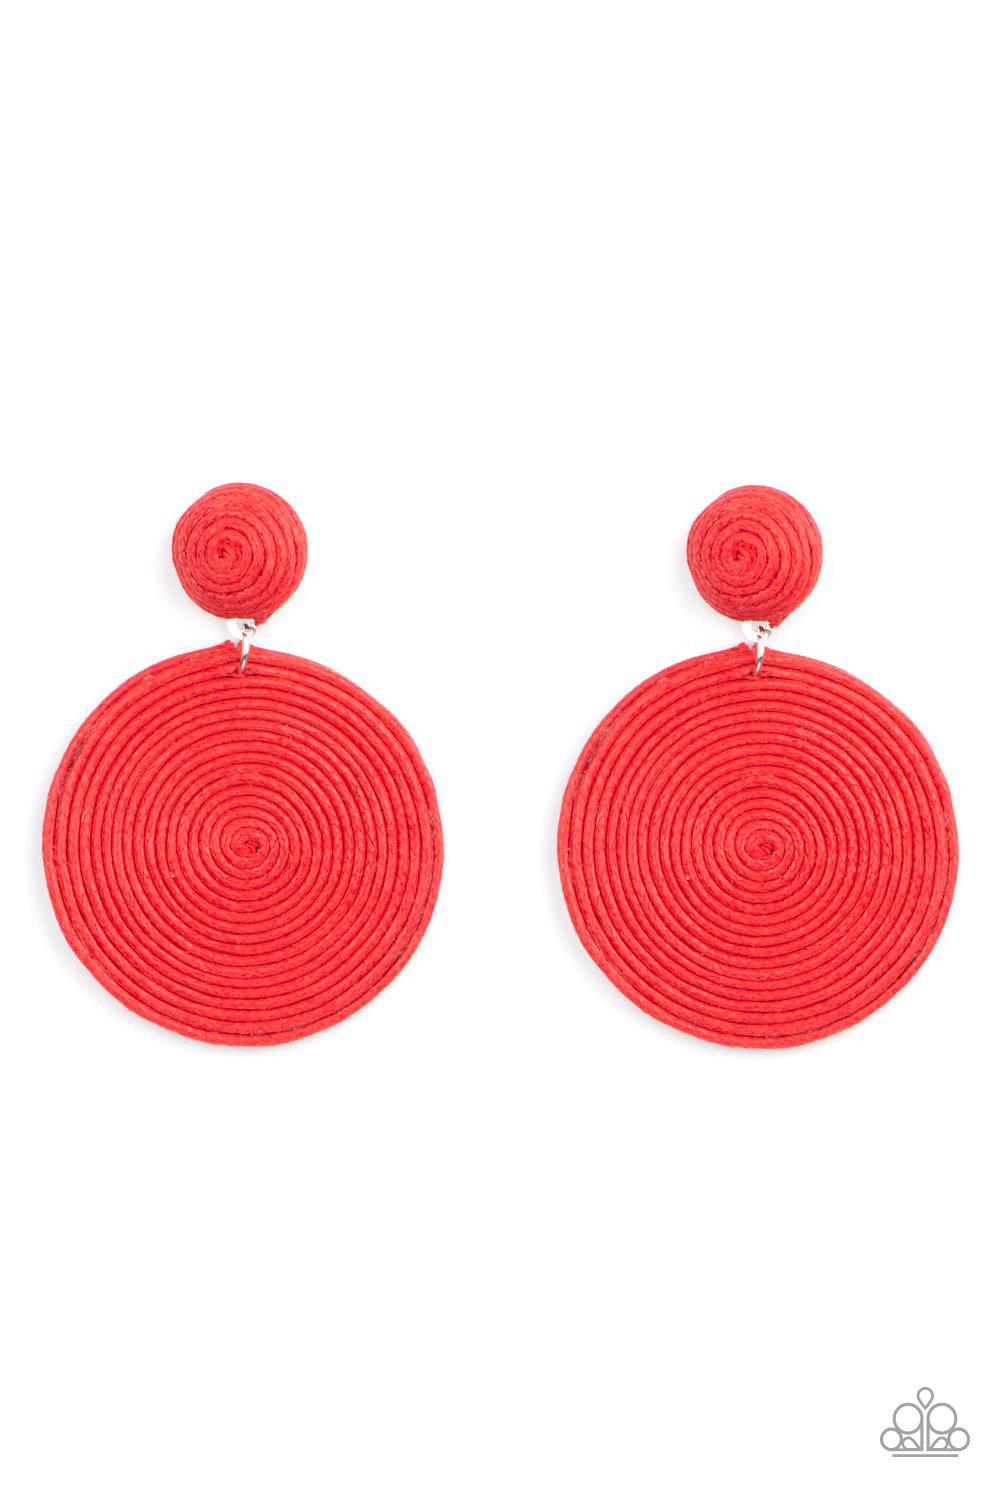 Circulate The Room Red Woven Post Earrings - Paparazzi Accessories- lightbox - CarasShop.com - $5 Jewelry by Cara Jewels